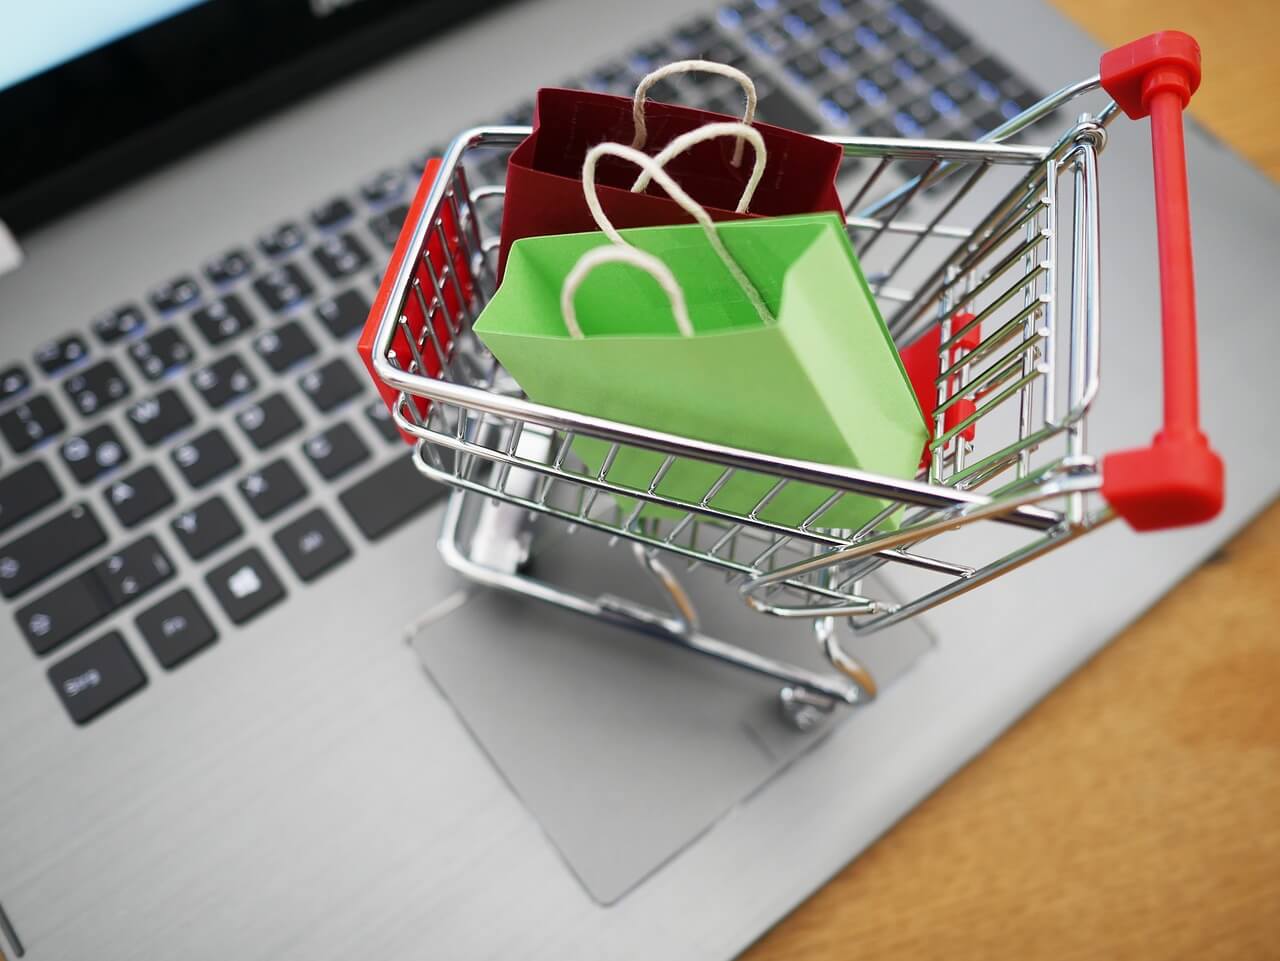 Shopping trolley and laptop representing digital and physical retail.